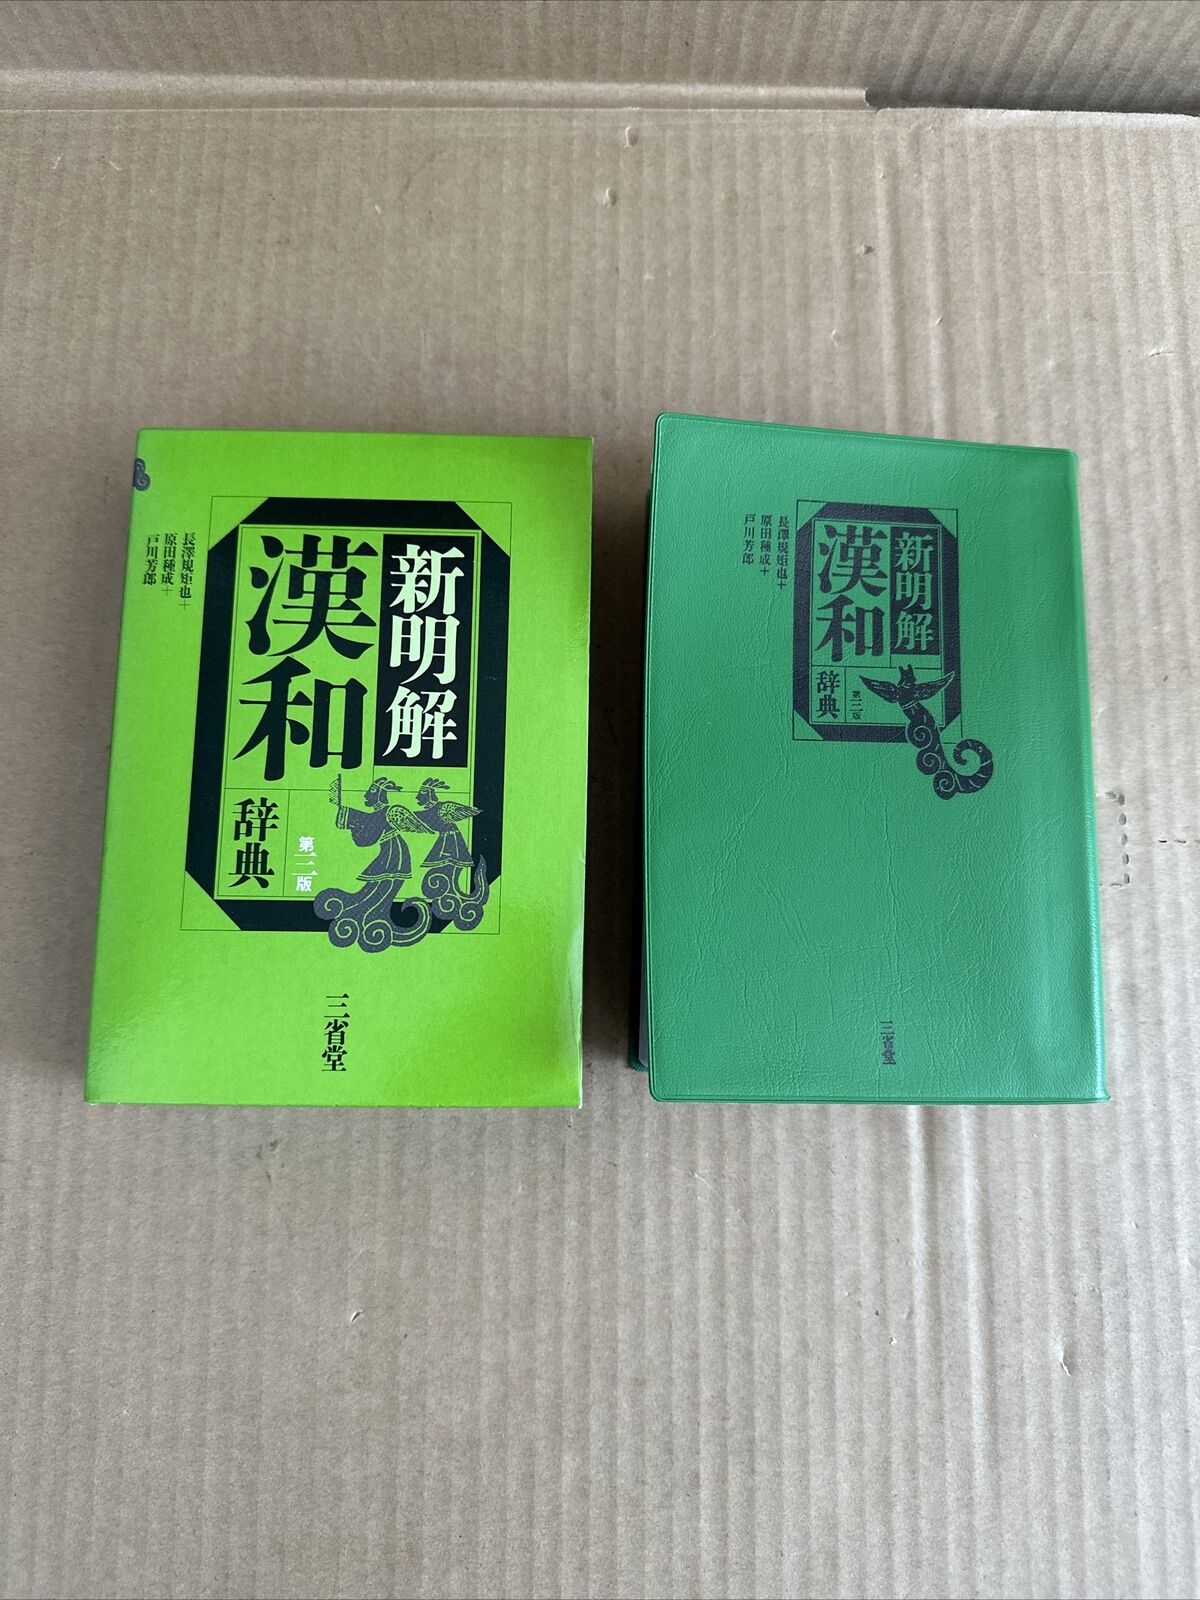 1986 DICTIONARY-Chinese Japanese Edition Book with Protective Sleeve Case